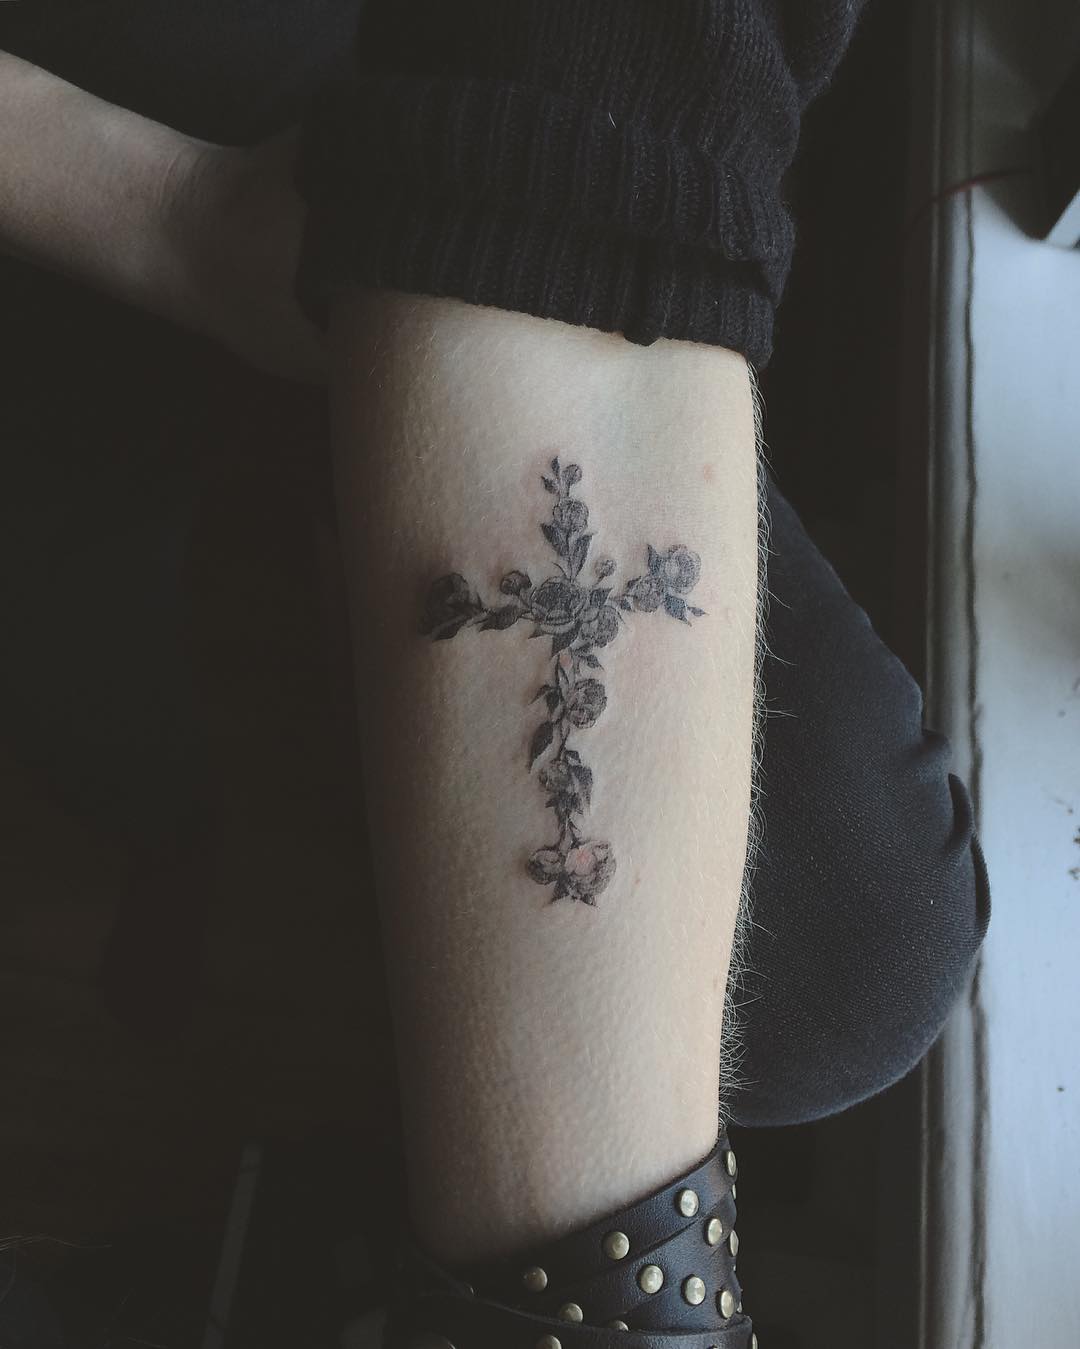 Buy Cross Flower Temporary Tattoo  Small Floral Cross Tattoo 1 Online in  India  Etsy